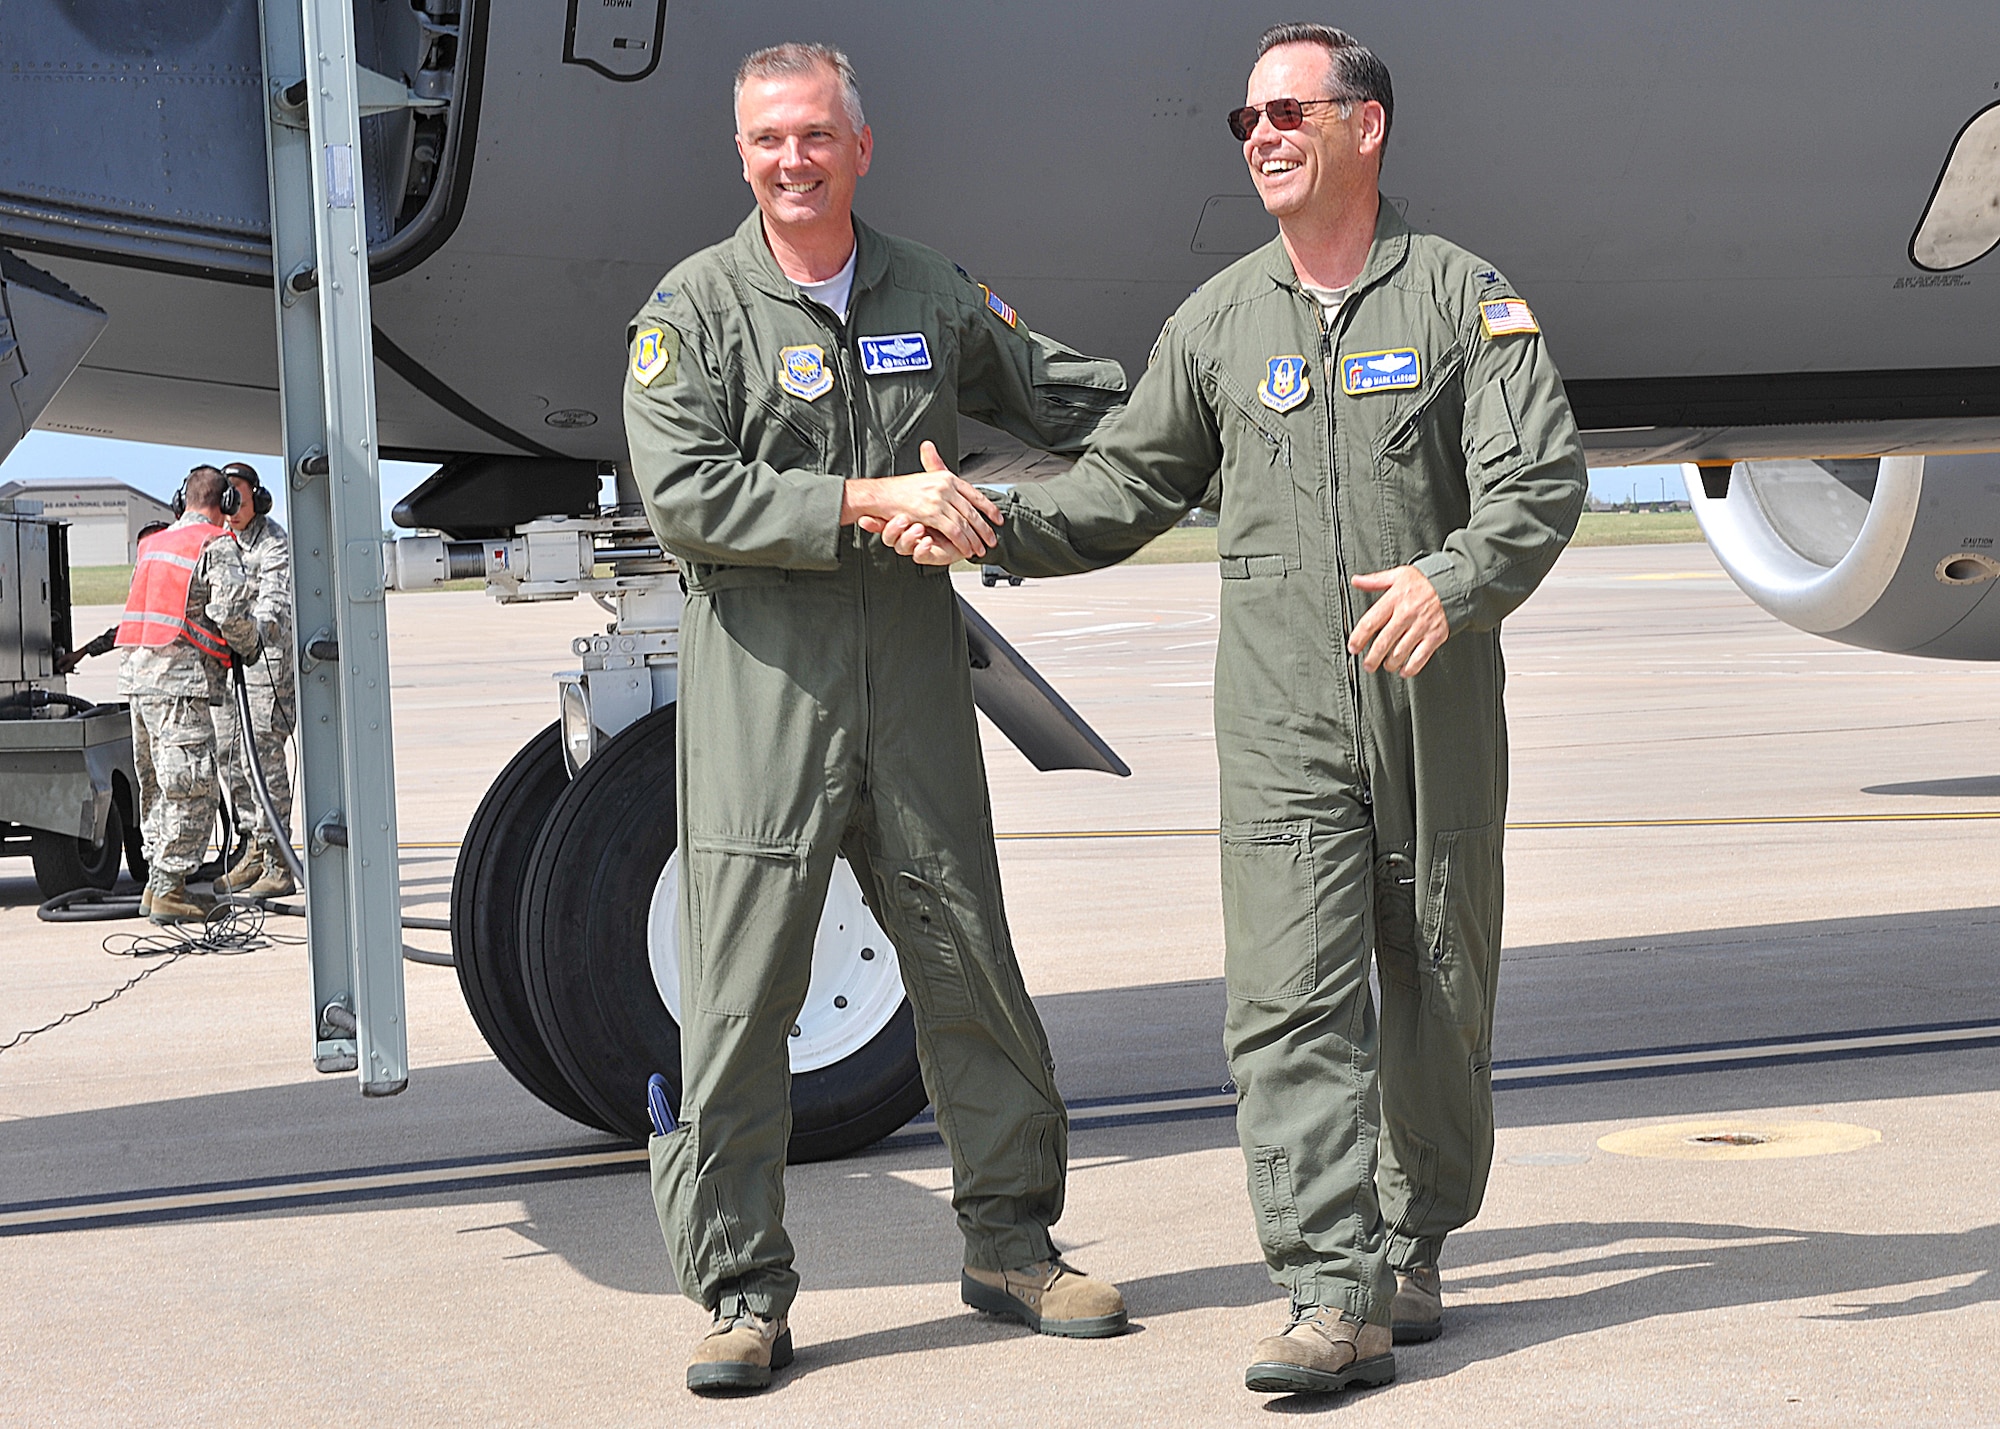 Col. Ricky Rupp, 22nd Air Refueling Wing commander, congratulates Col. Mark Larson, 931st Air Refueling Group commander, Sept. 26, 2012, McConnell Air Force Base, Kan. The 931st ARG accomplished their target for the 2012 fiscal year by achieving 3,688 flying hours. (U.S. Air Force photo/Airman 1st Class Maurice A. Hodges)